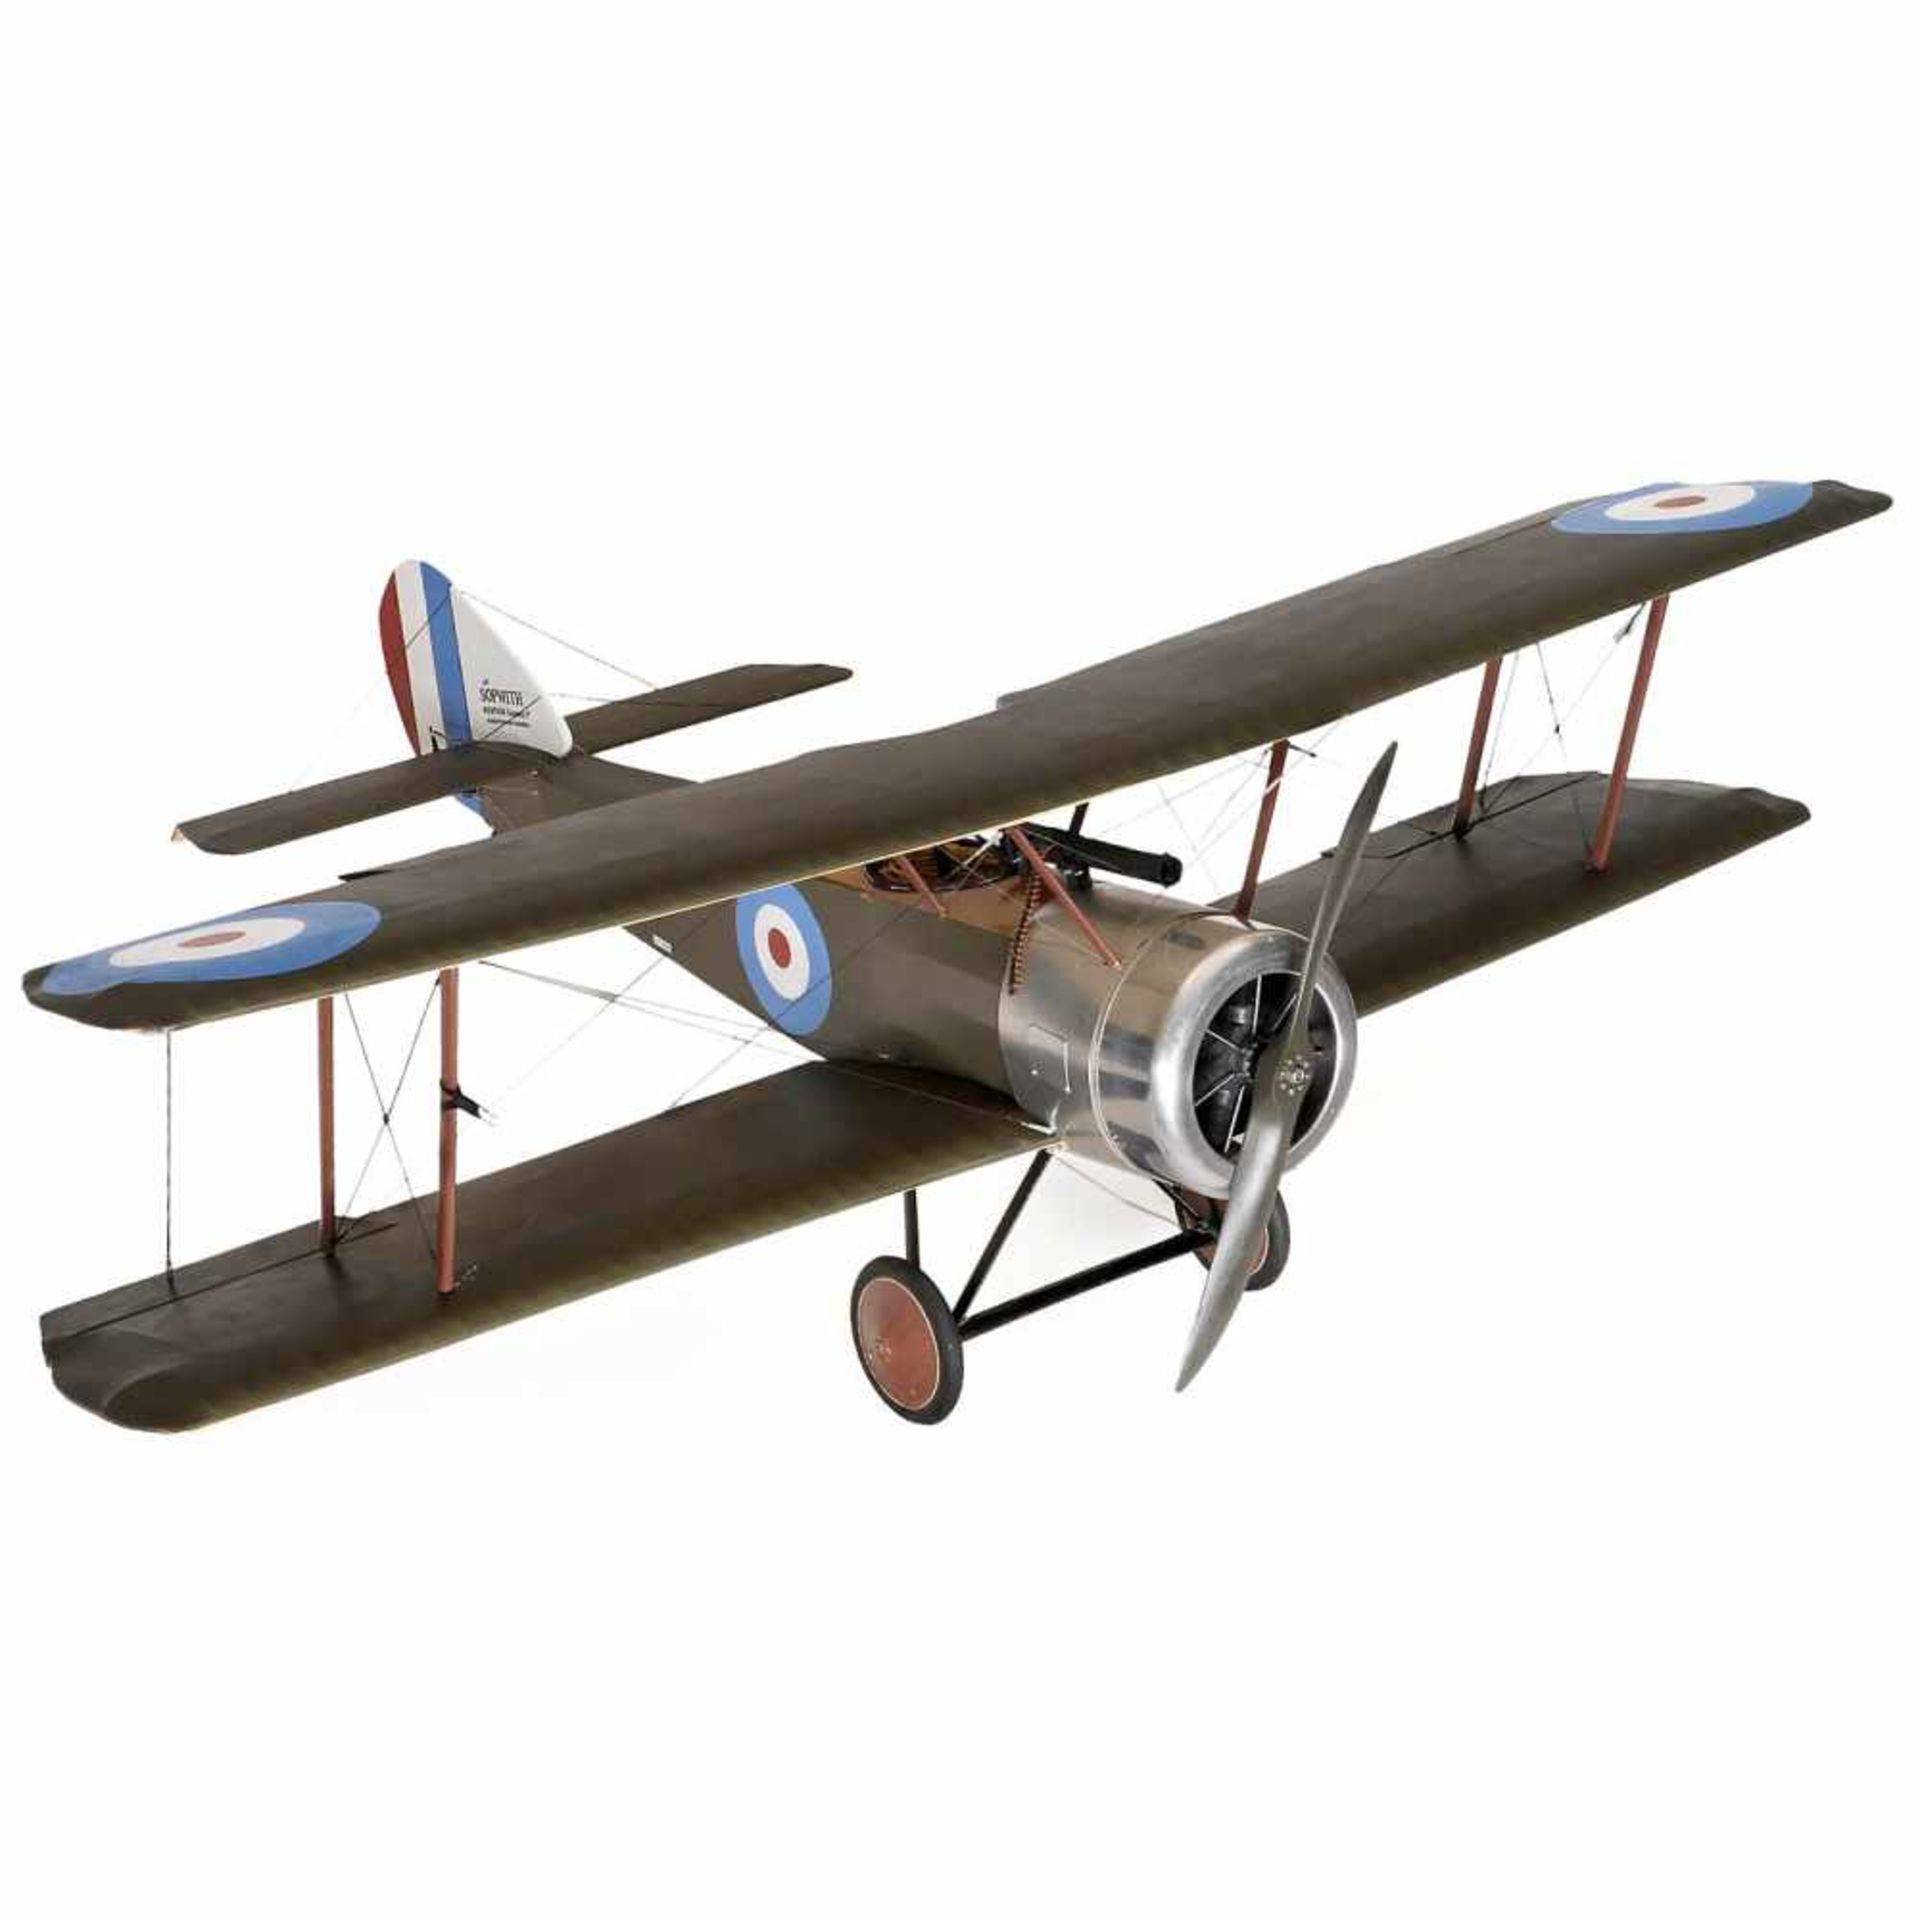 Sopwith 'Pup' N5180 Model AircraftA well-constructed wood-framed flying scale model of this Royal